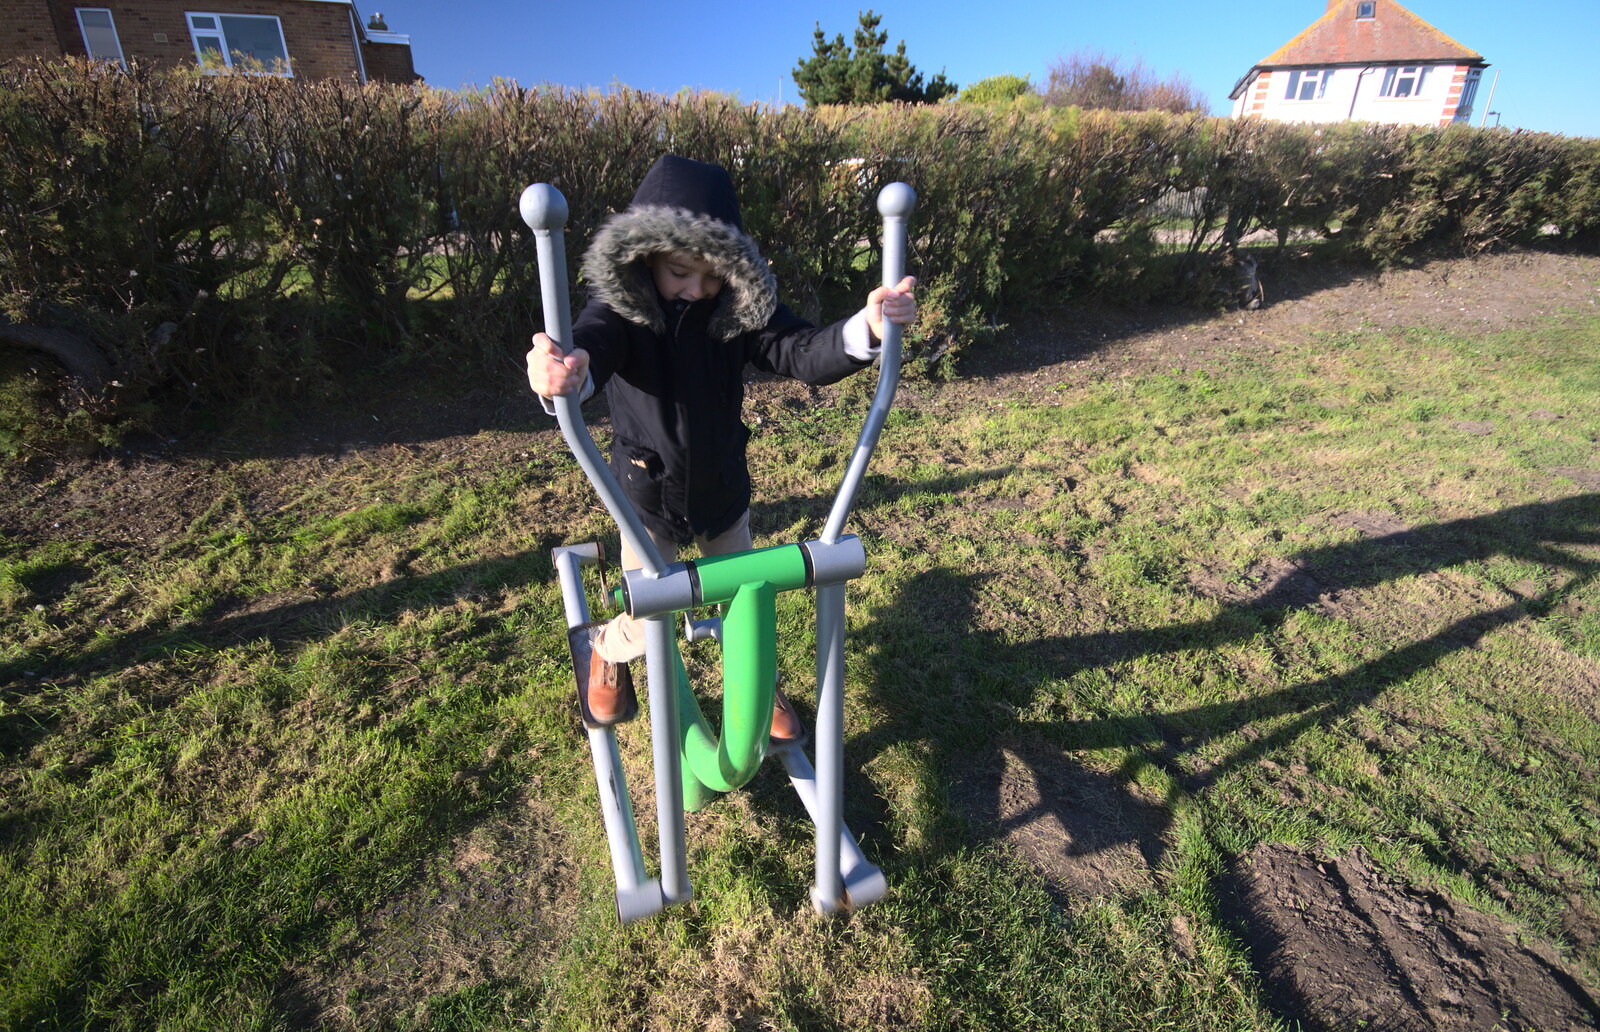 Fred tries one of the exercise machines from Sunset at the Beach, Southwold, Suffolk - 18th November 2018